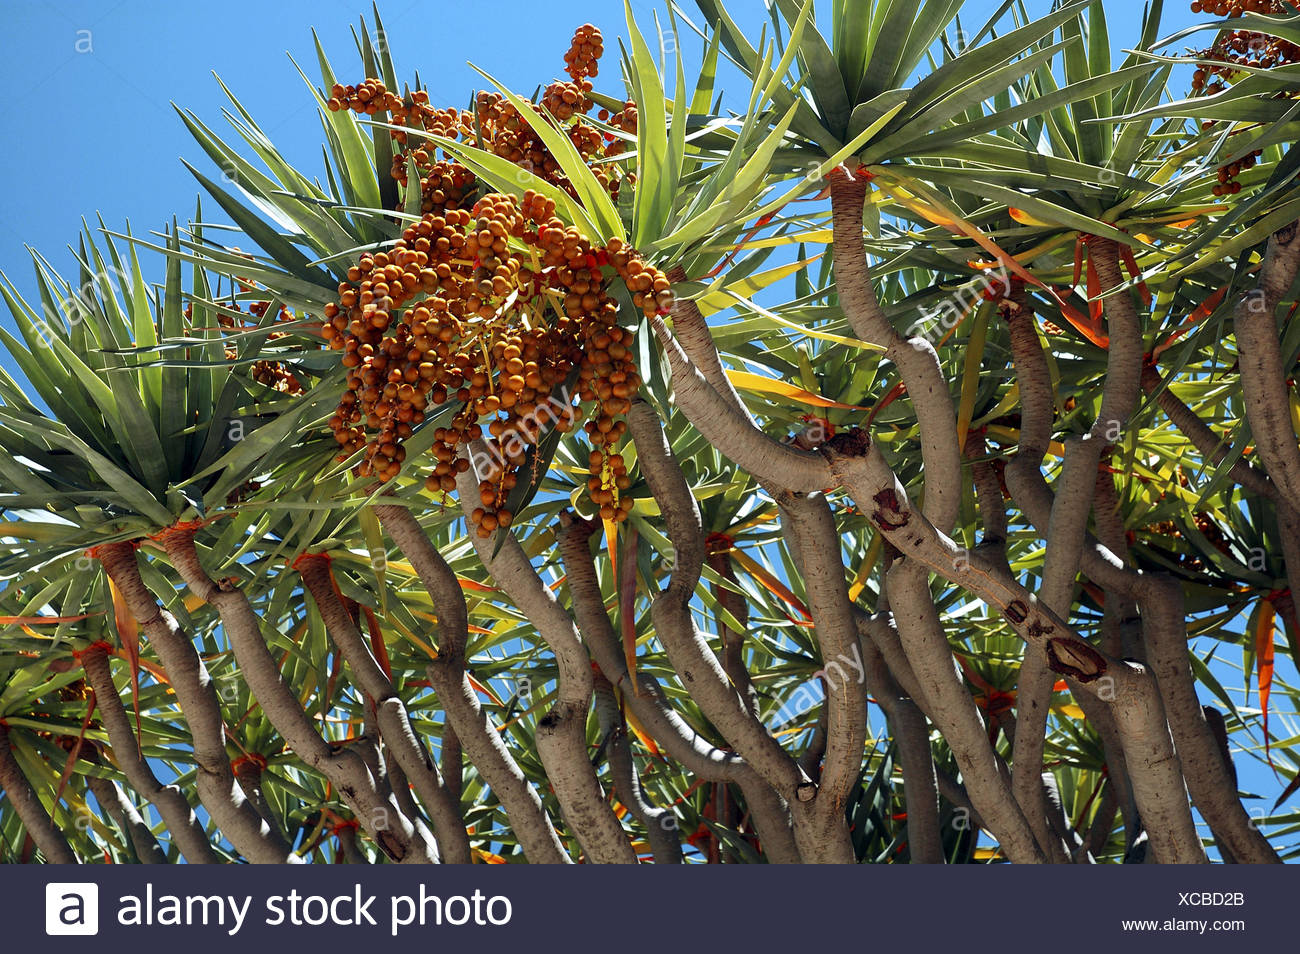 Dragon S Blood Tree Dracaena Draco With Orange Berries Red Sap Of This Tree Was Used By Ancient Egyptians As An Ingredient Stock Photo Alamy